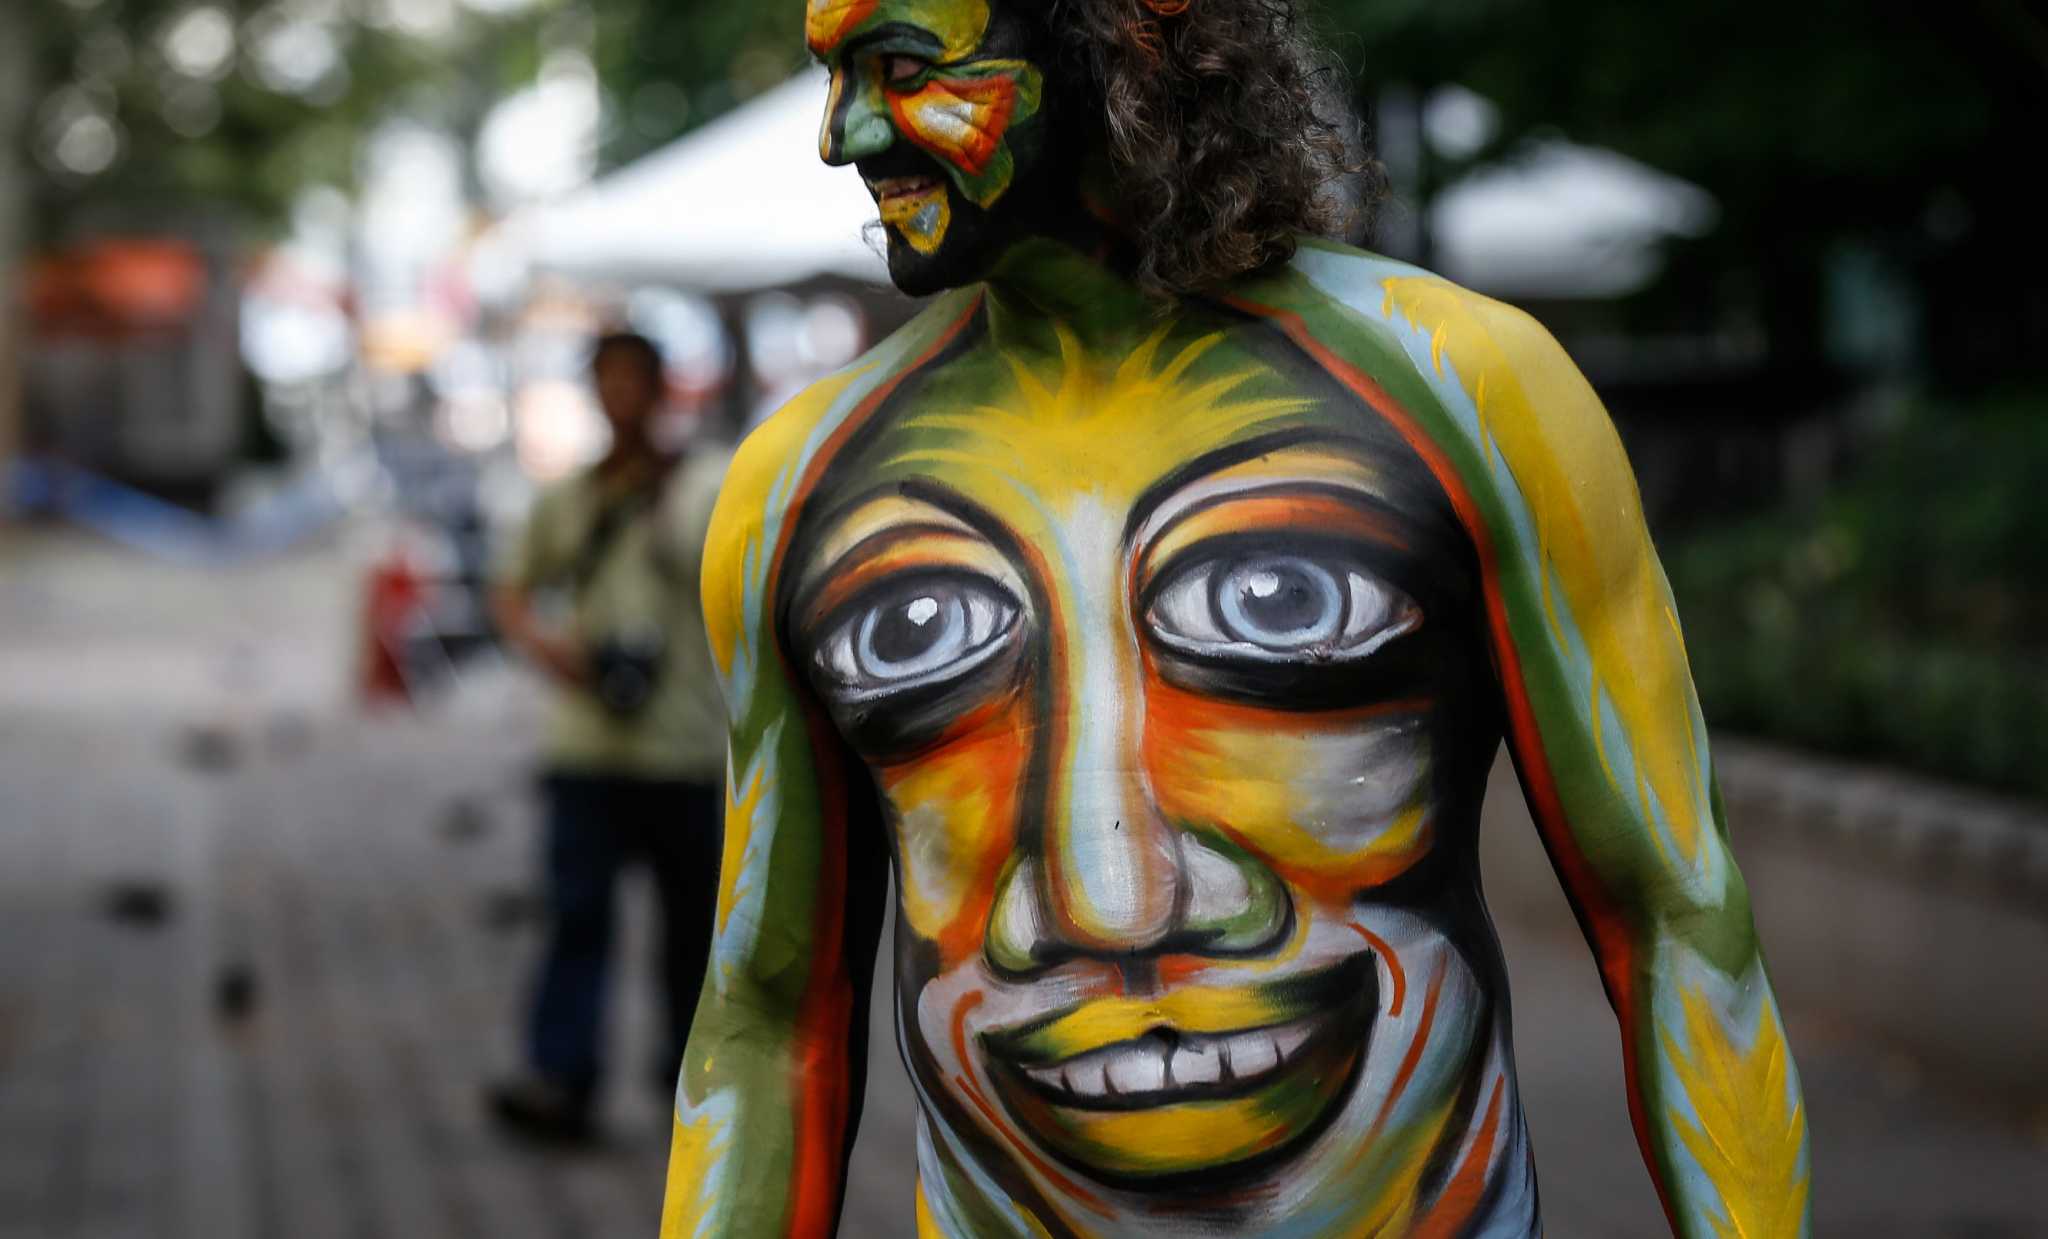 Nudists Advocate For More Adults To Opt For Body Paint Costumes At